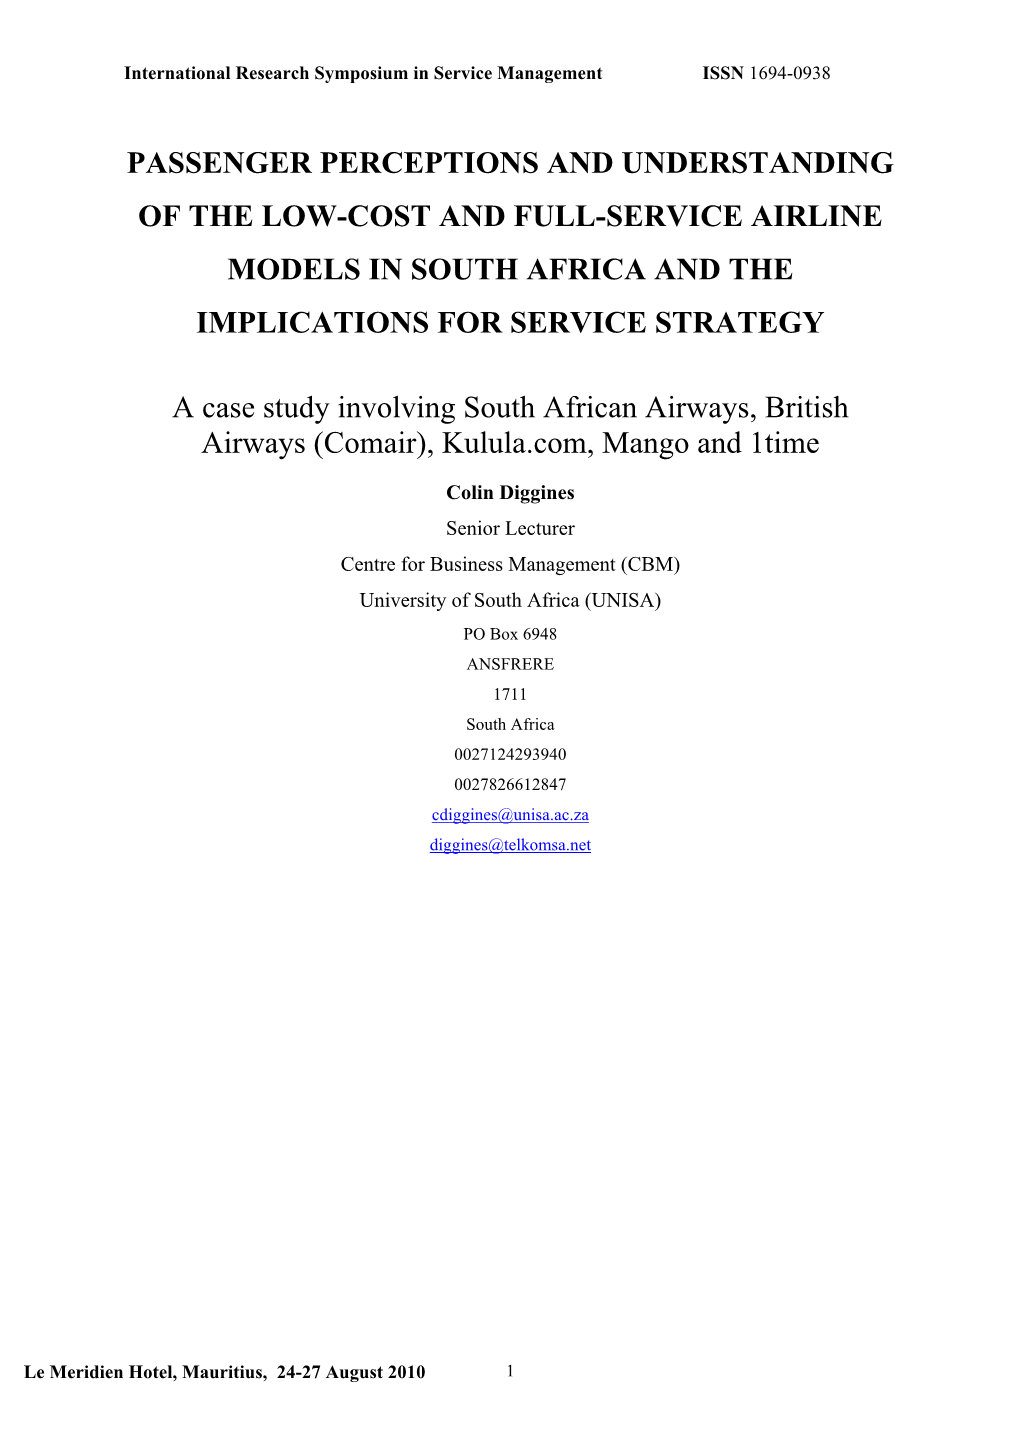 Passenger Perceptions and Understanding of the Low-Cost and Full-Service Airline Models in South Africa and the Implications for Service Strategy